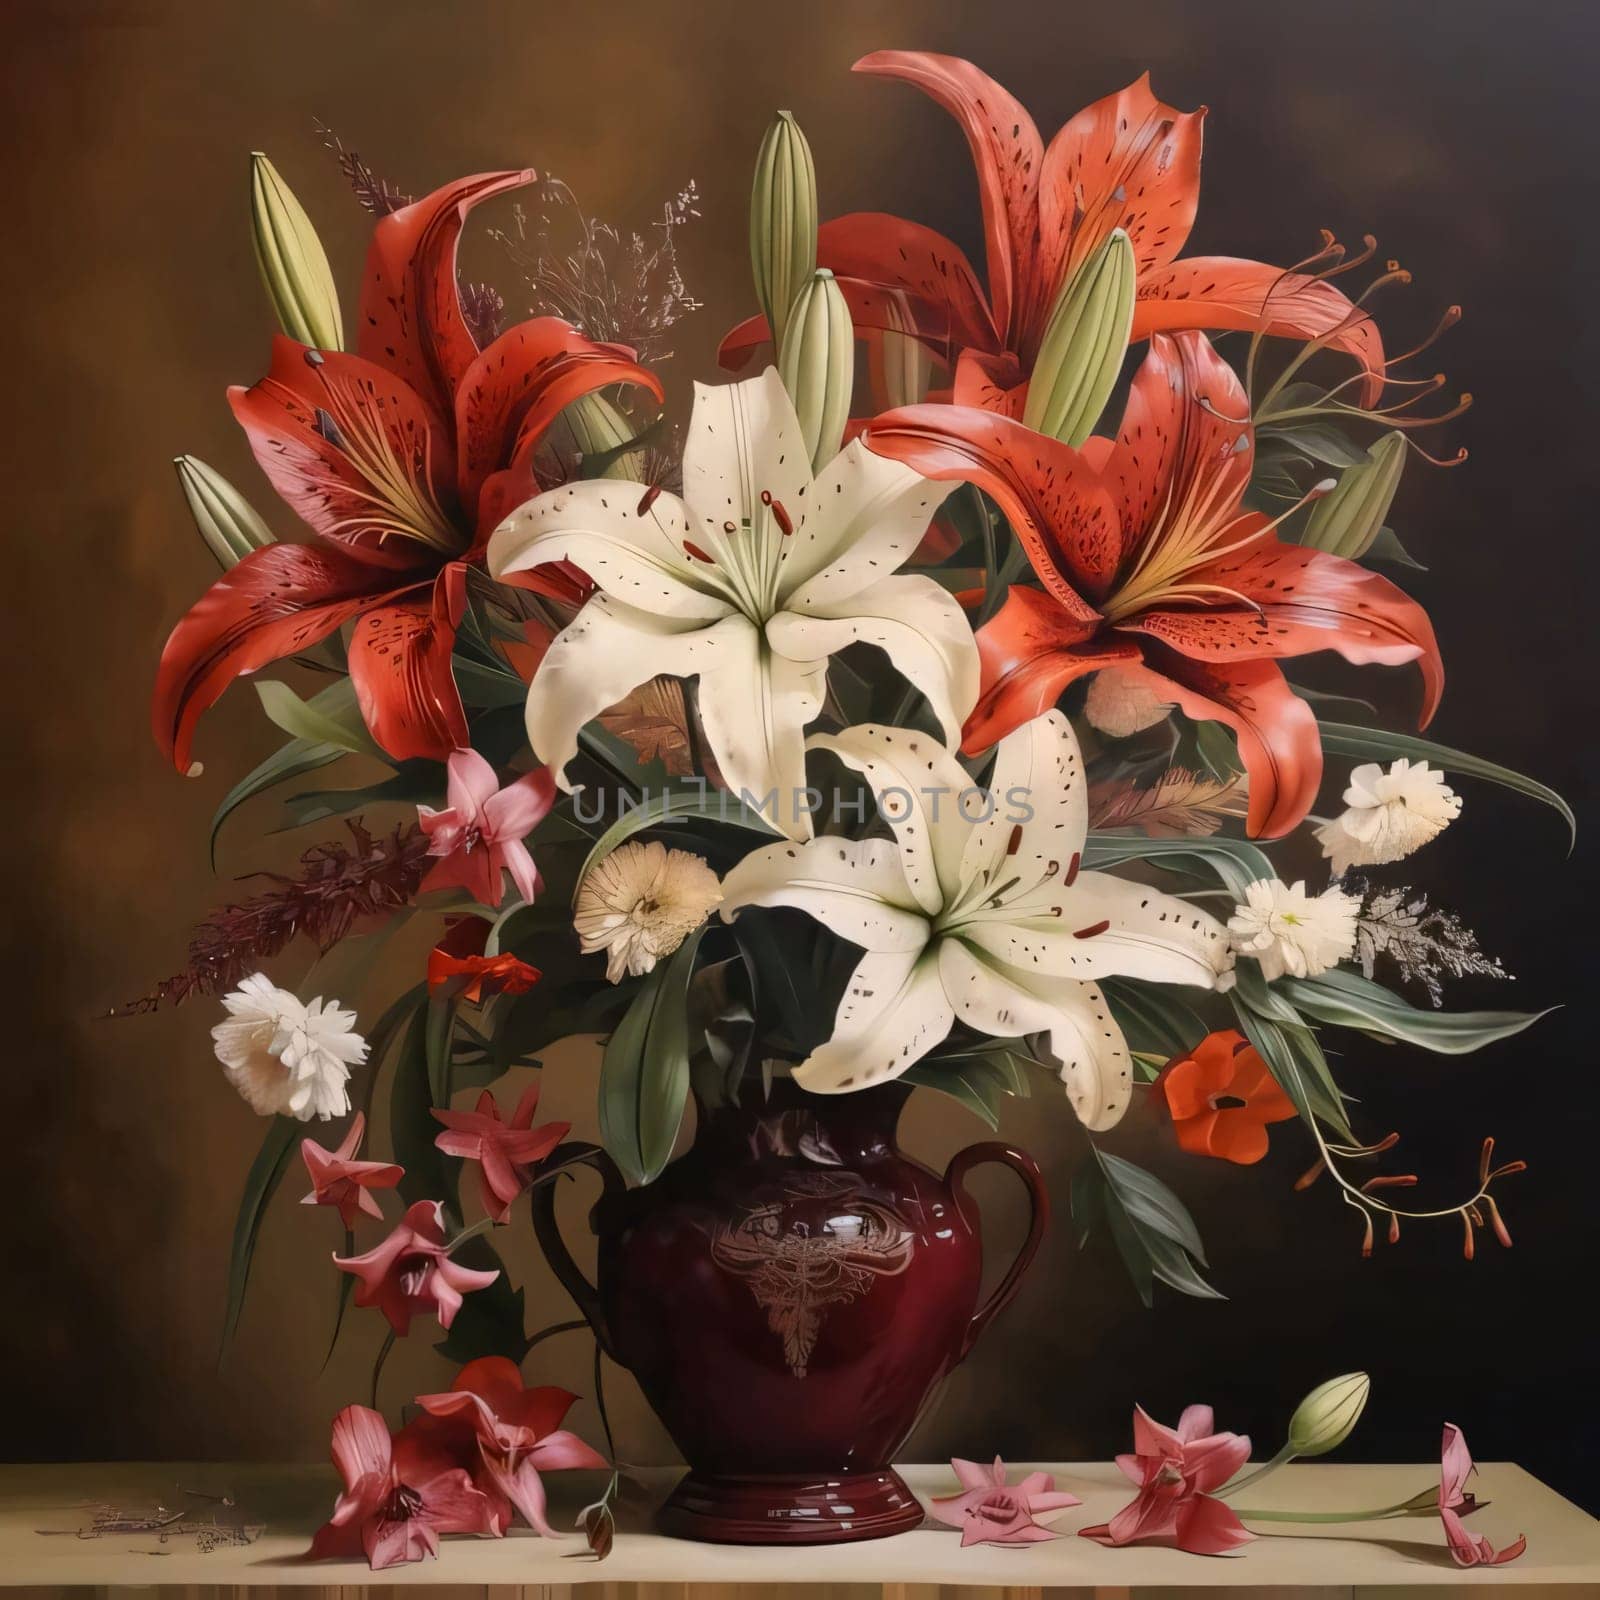 Antique brown vase, in it white and red flowers. Flowering flowers, a symbol of spring, new life. A joyful time of nature waking up to life.